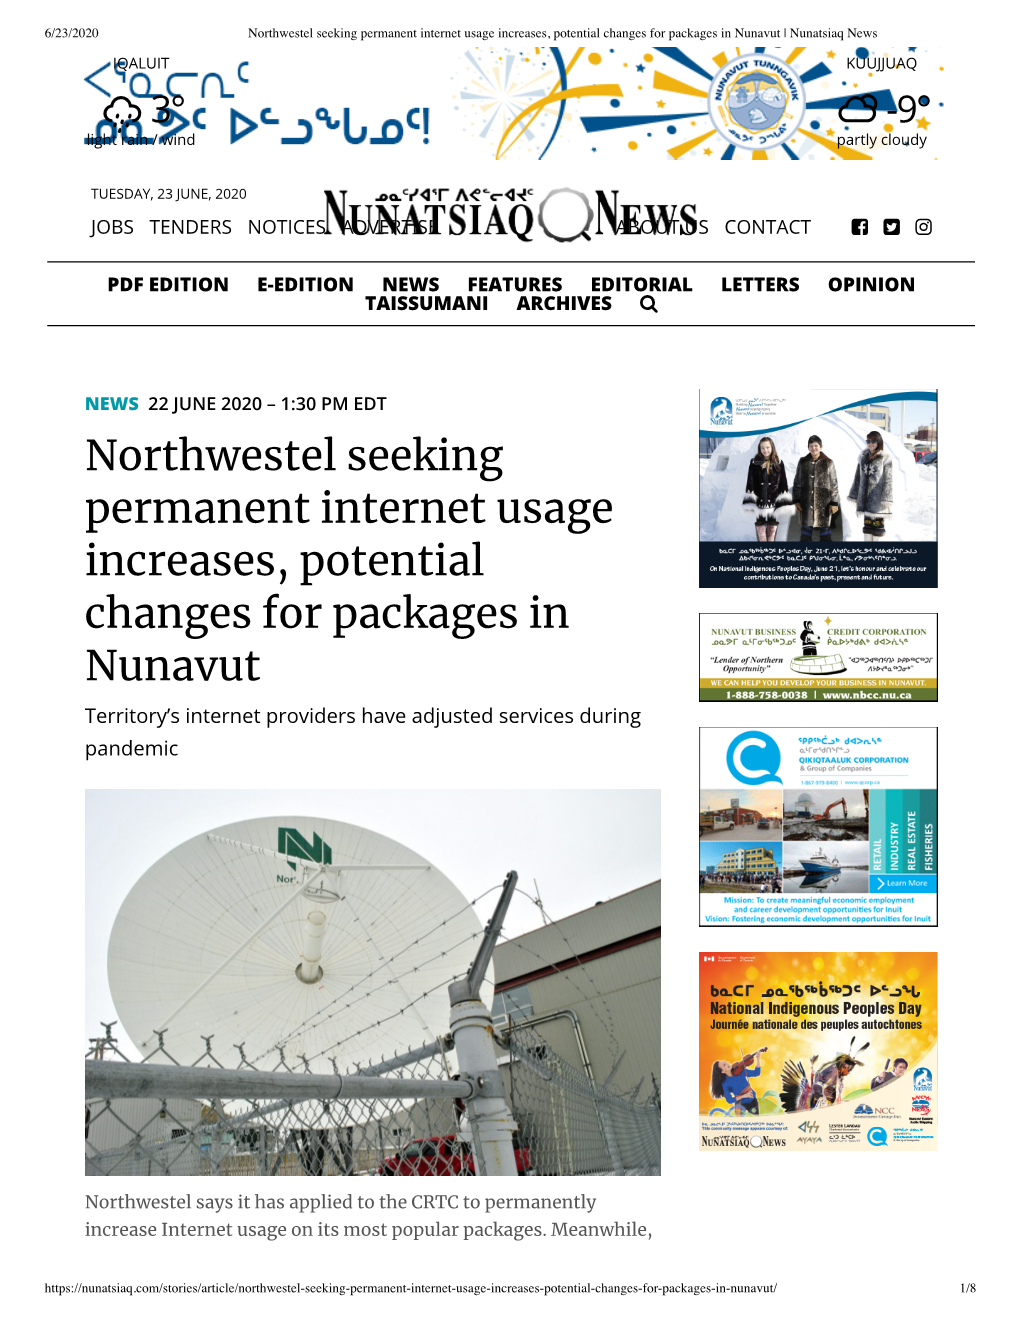 Northwestel Seeking Permanent Internet Usage Increases, Potential Changes for Packages in Nunavut | Nunatsiaq News